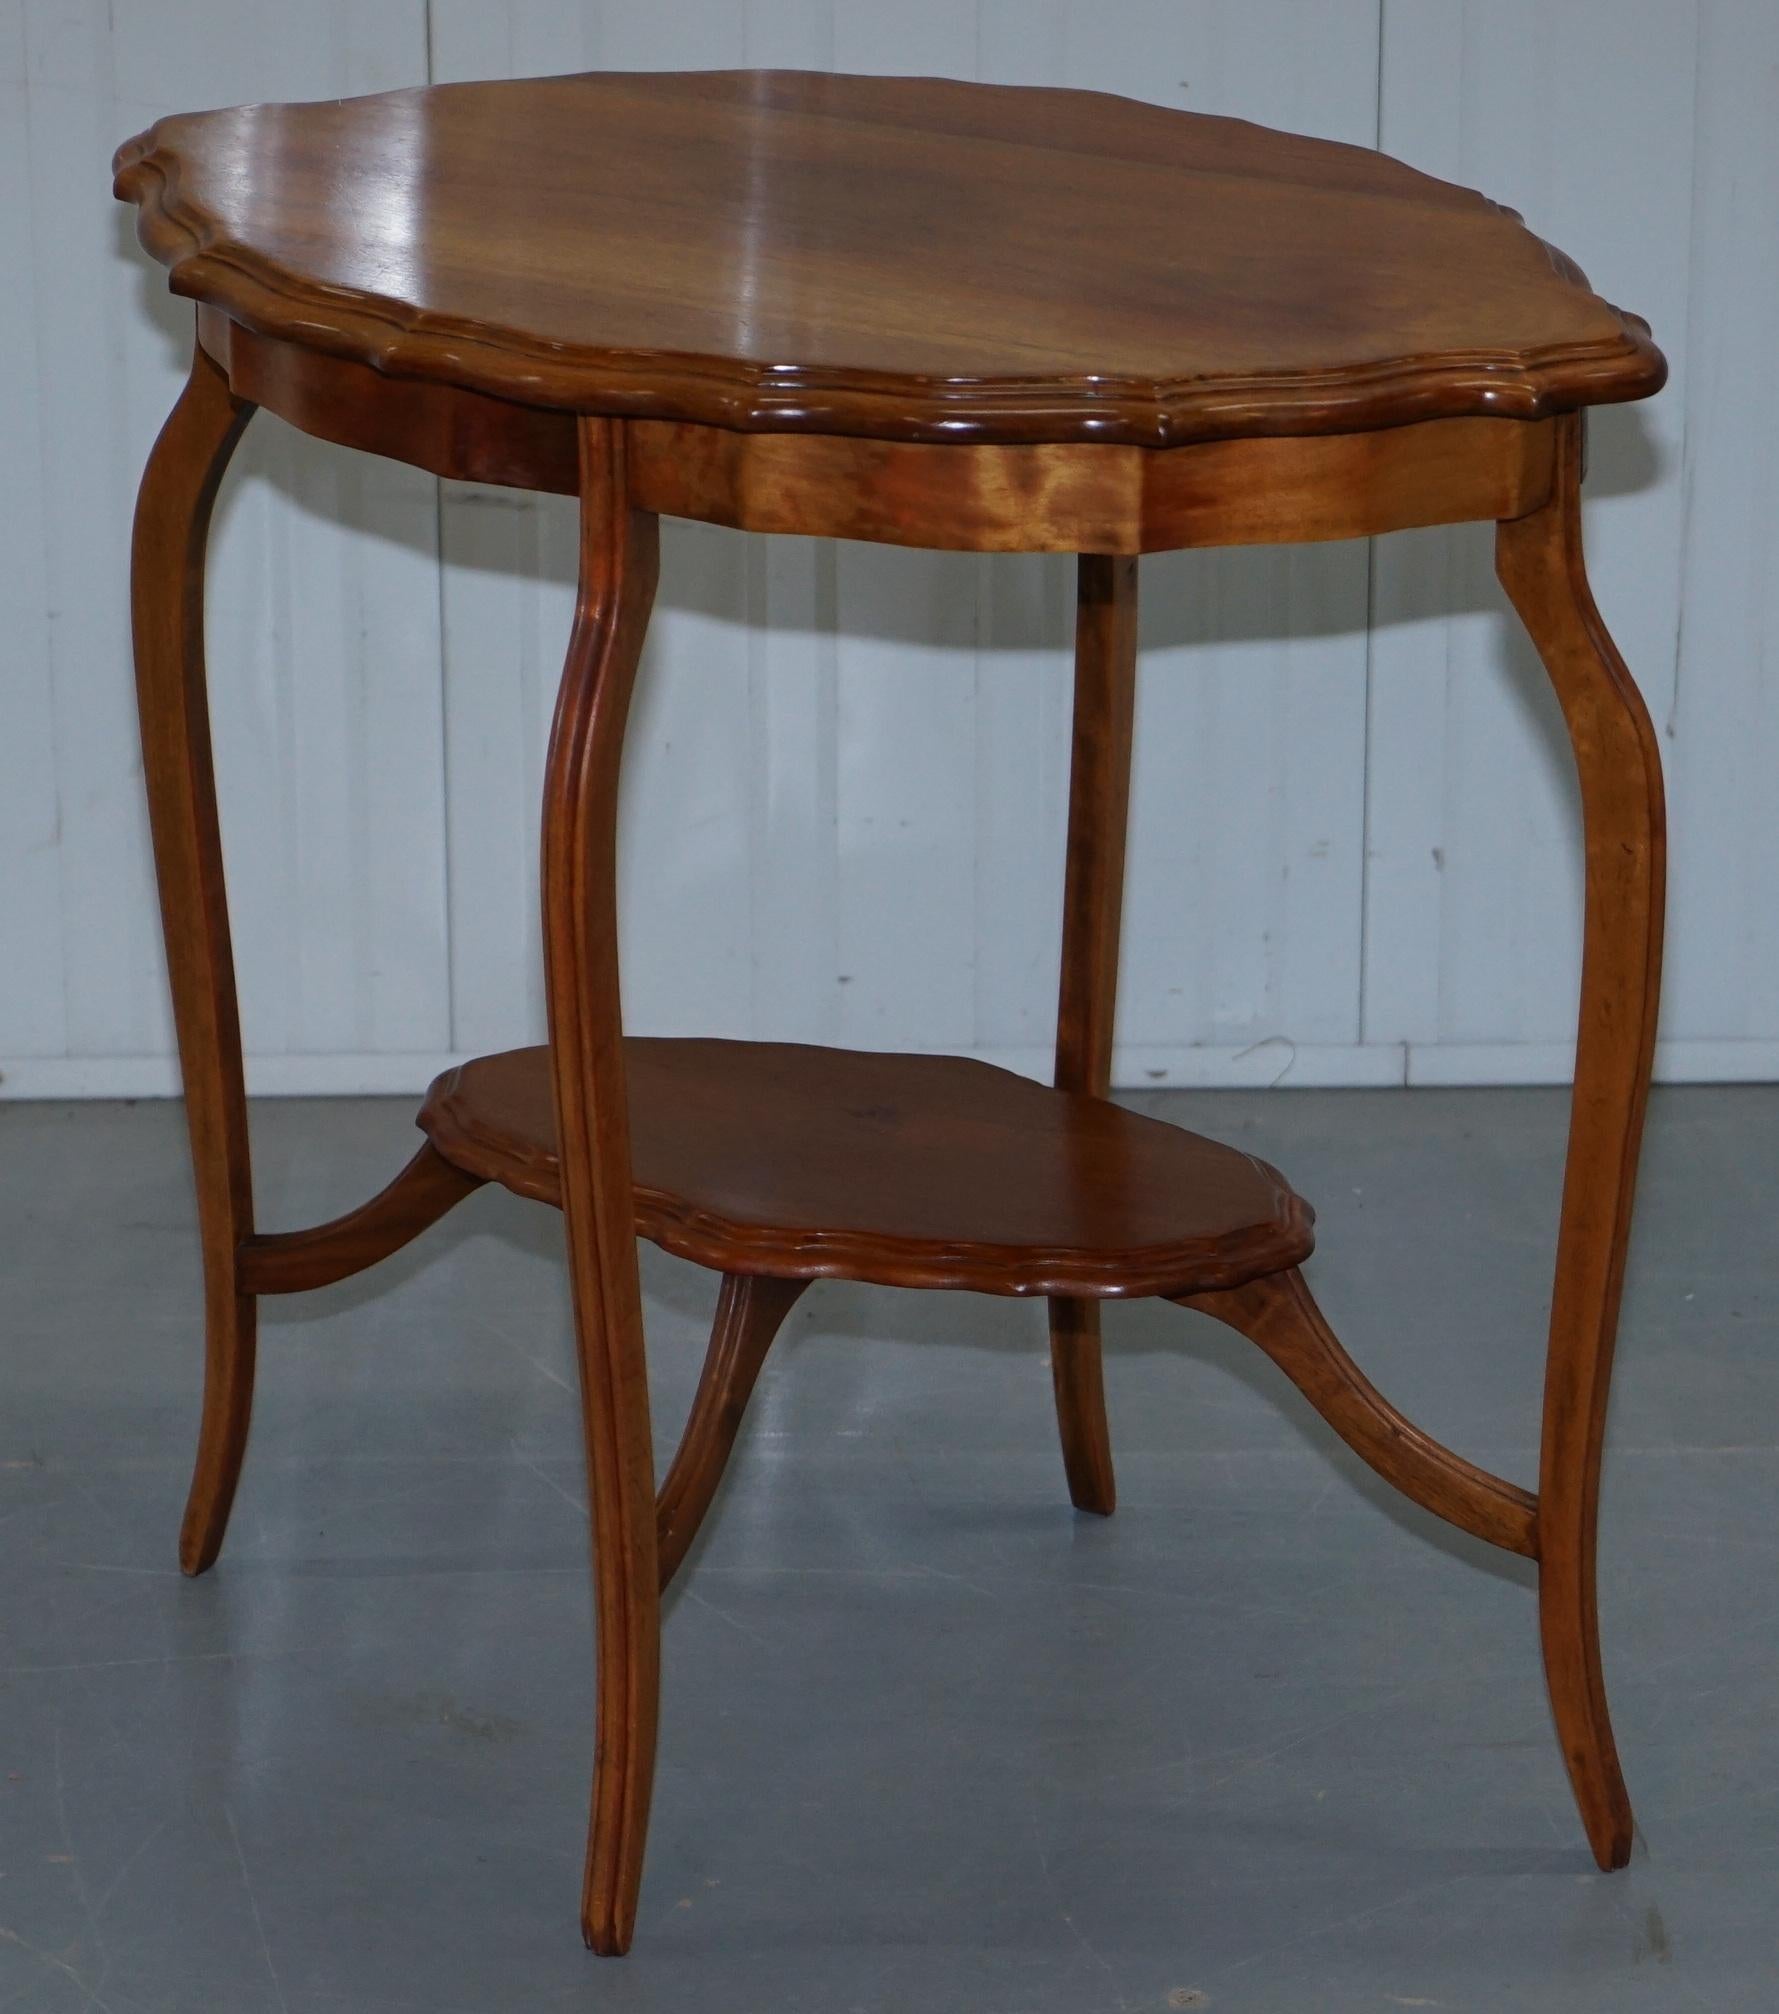 English Lovely Decorative Satinwood Occasional Centre Table Scalloped Edge Ornate Legs For Sale